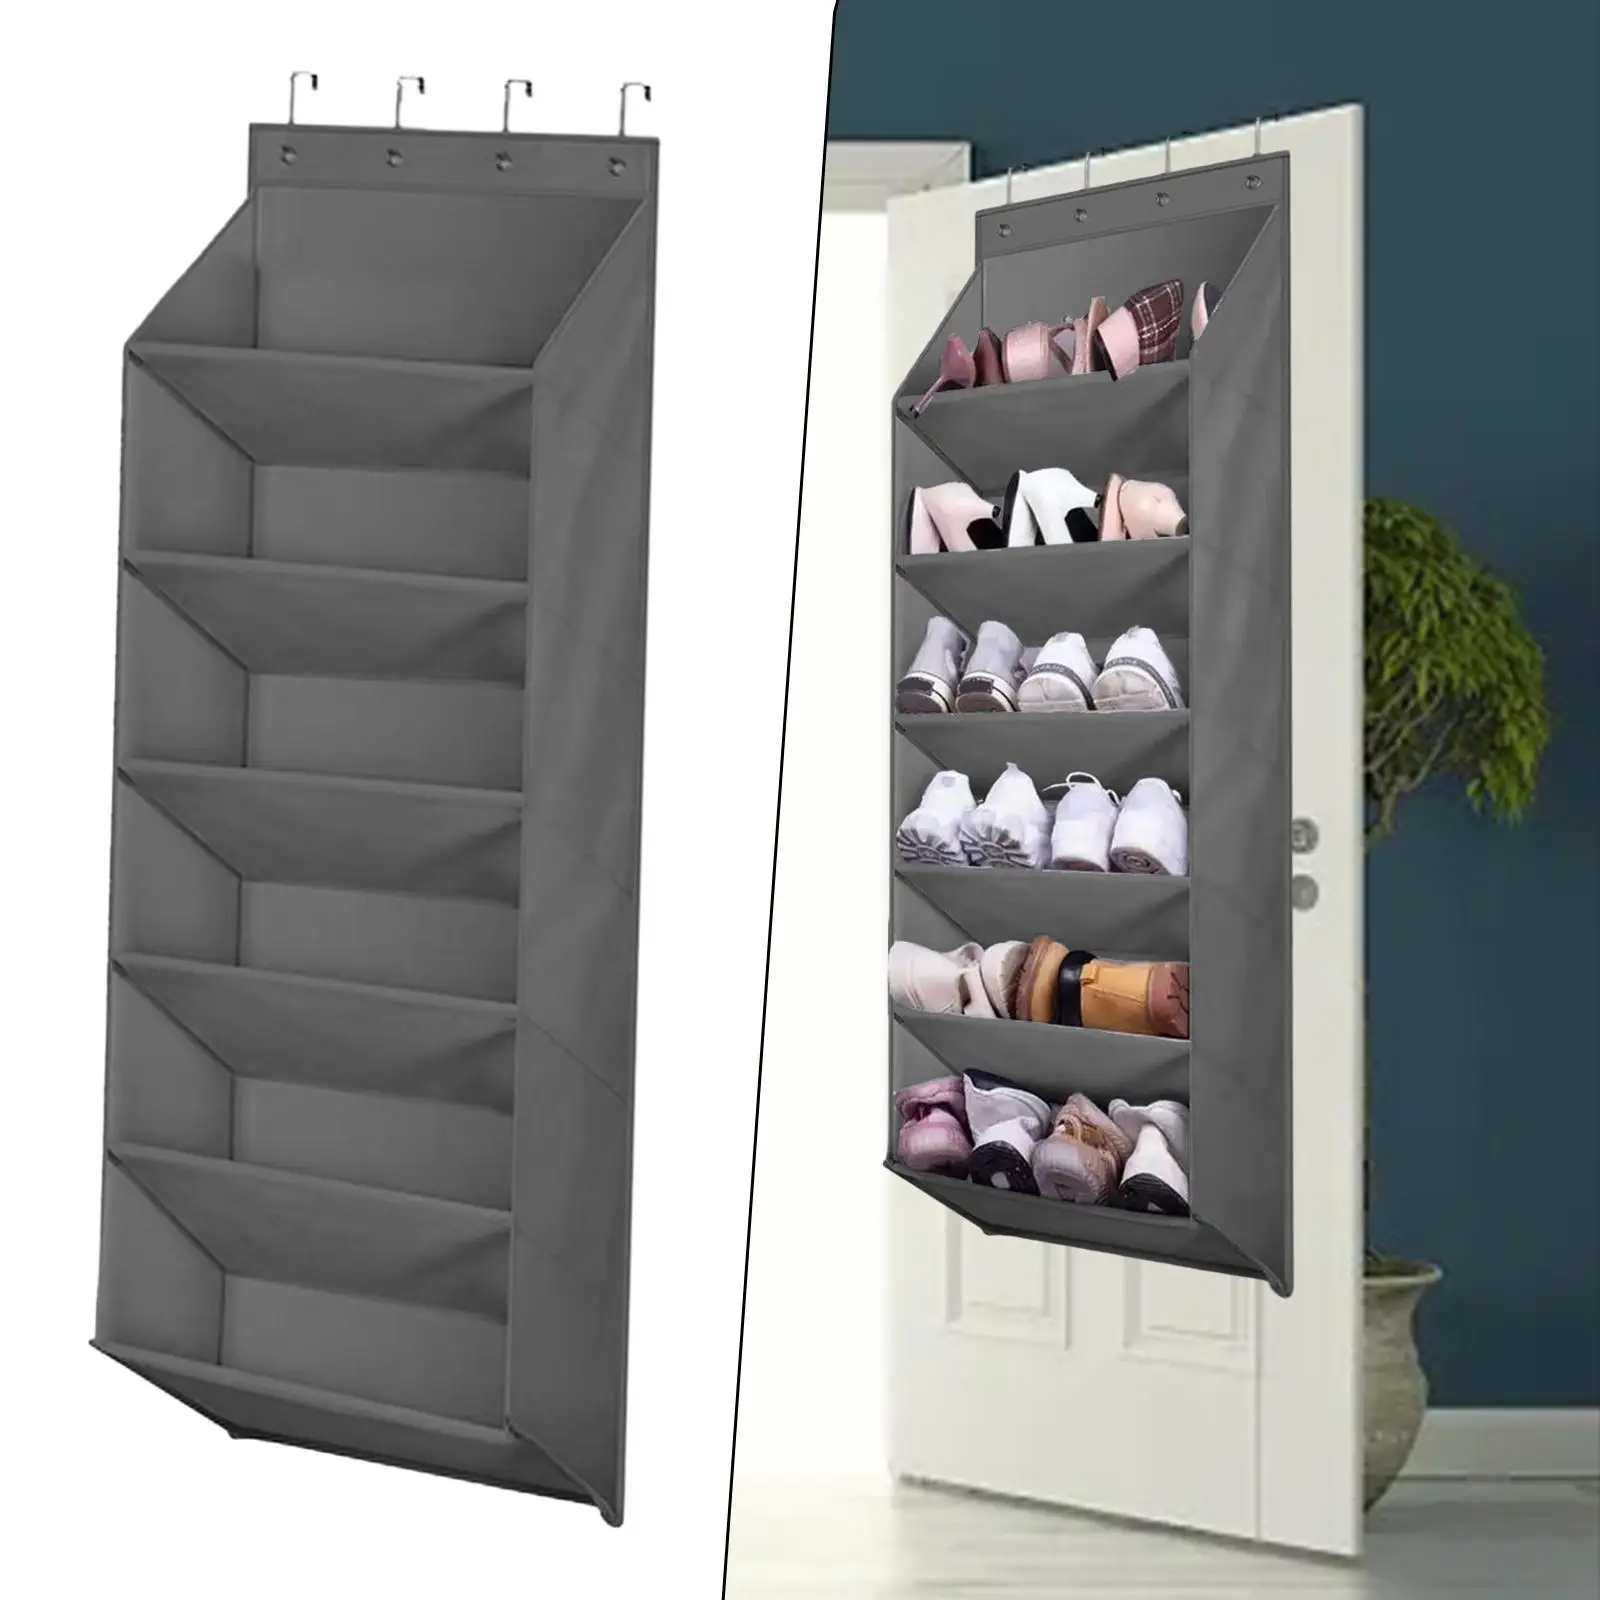 6 Tier Large Deep Pockets Door Shoe Rack for Towels Baby Items 16 Pair Shoes